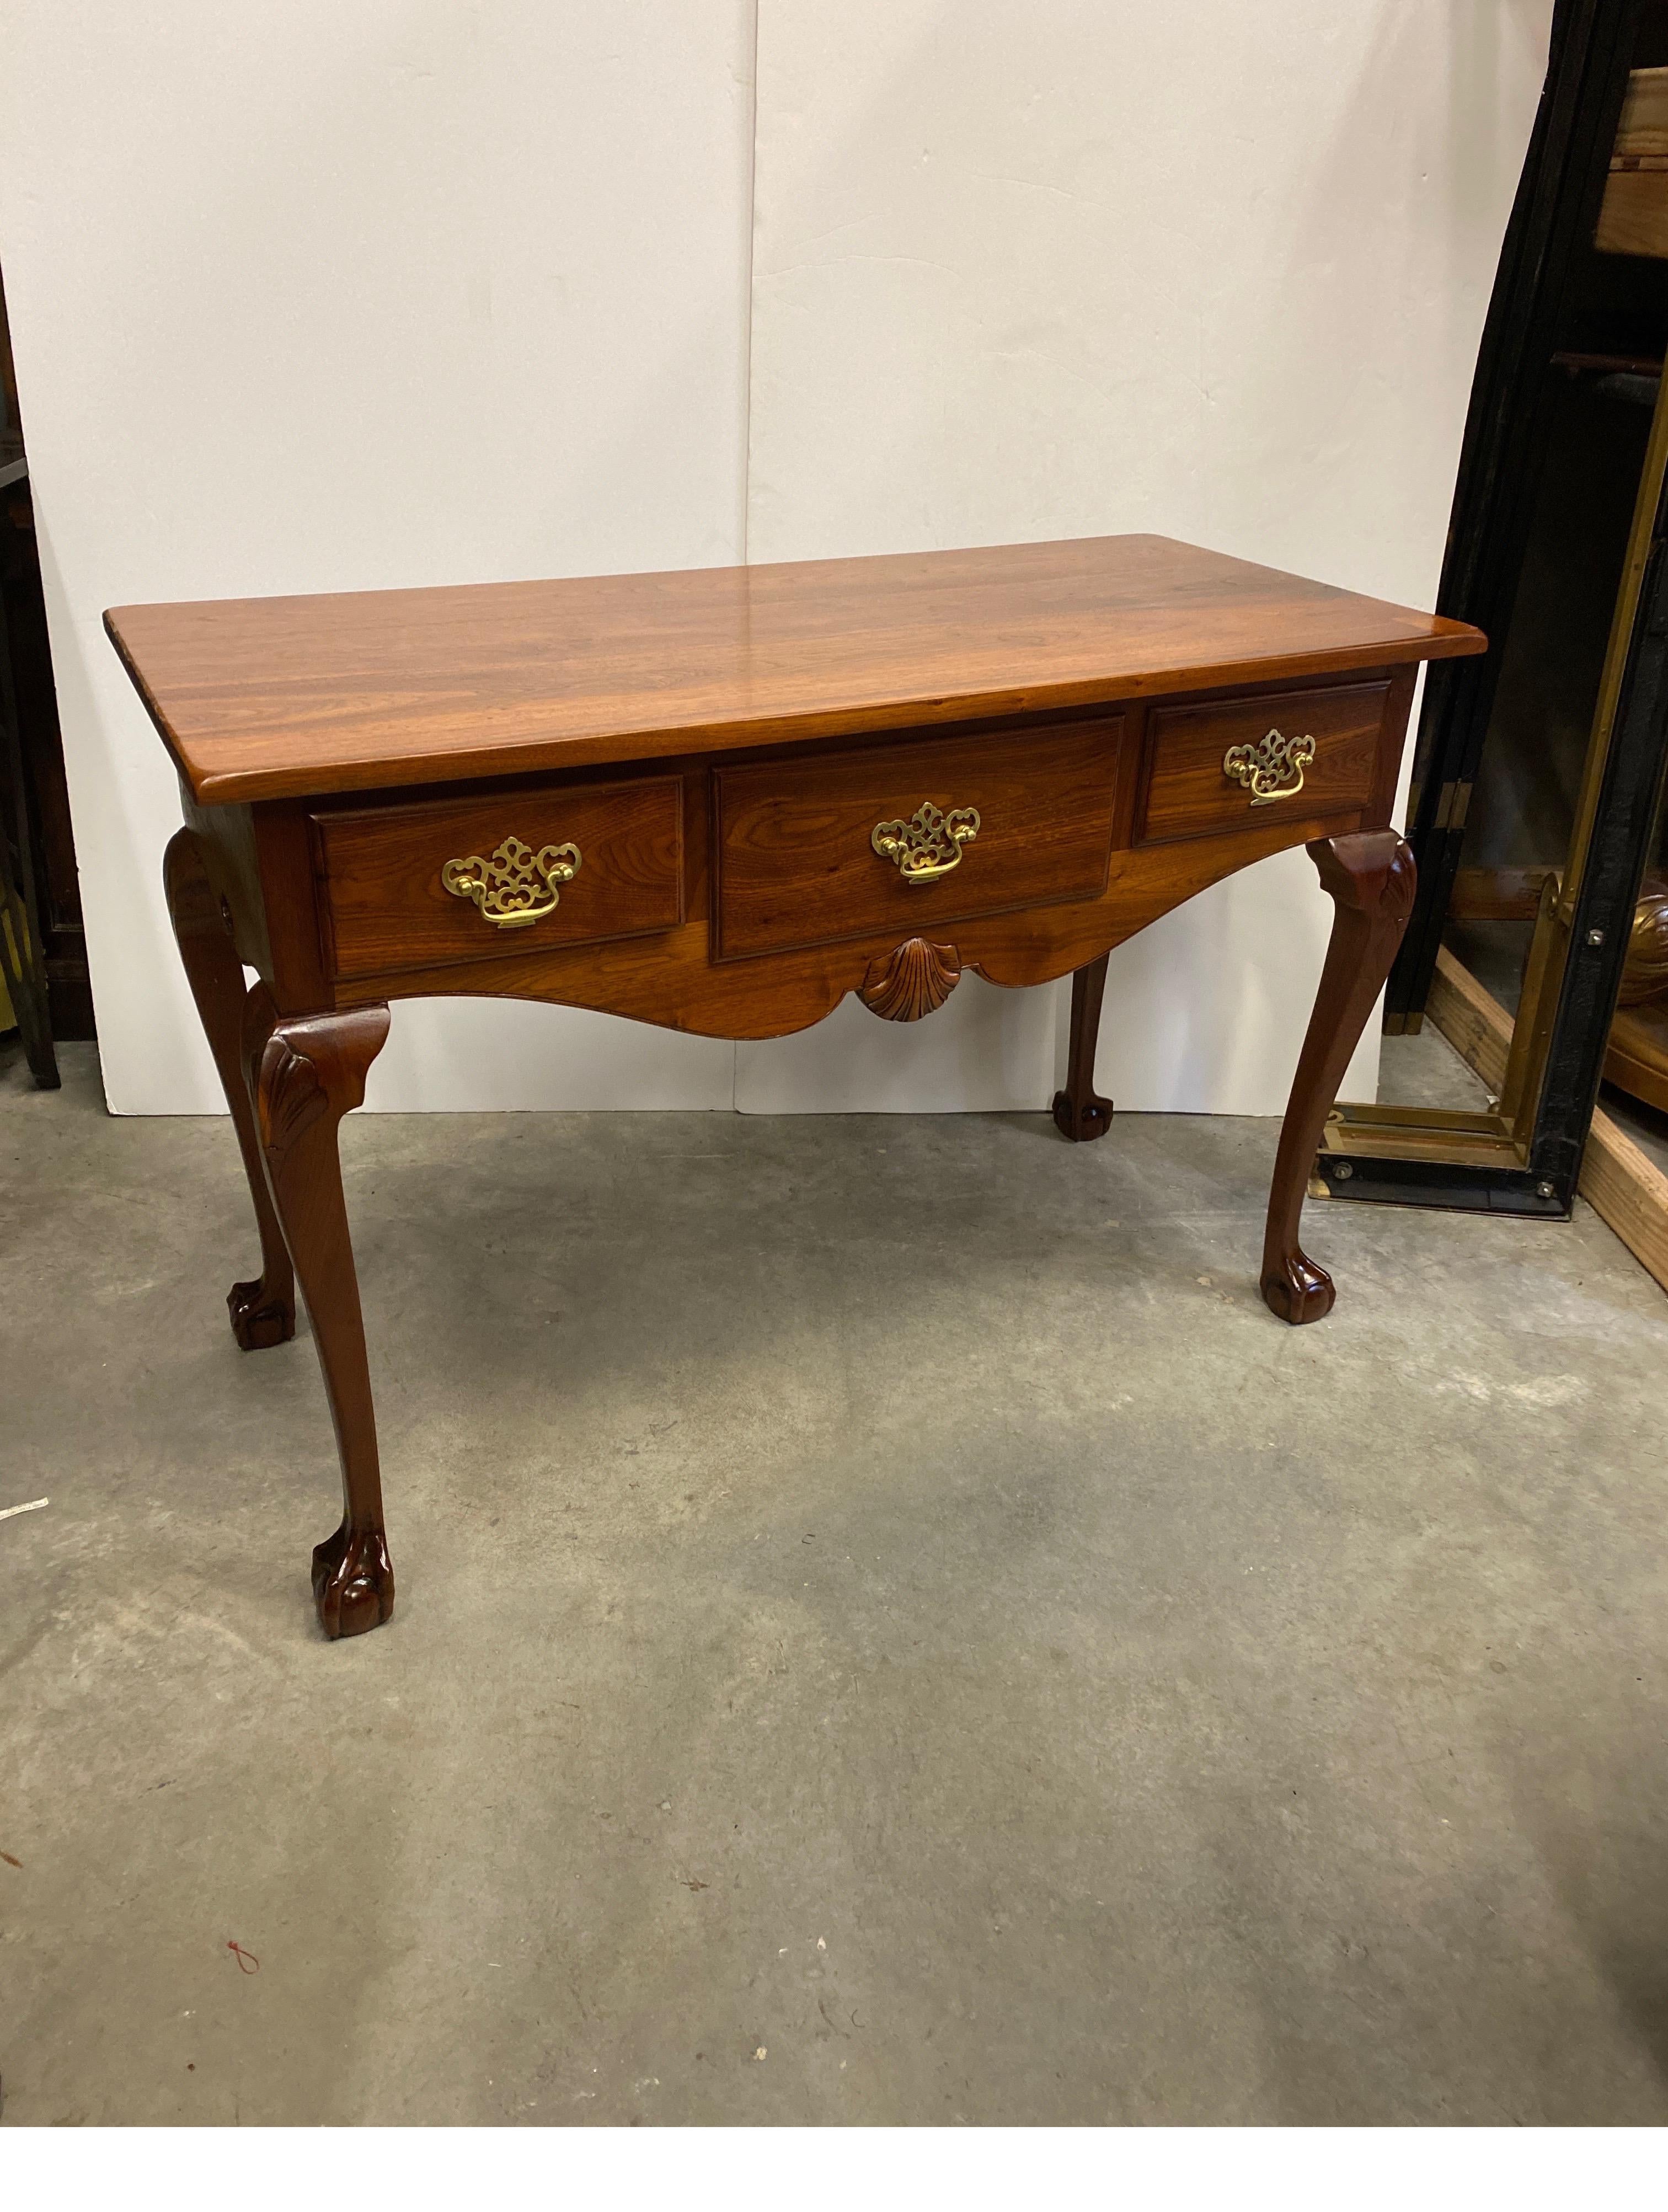 Elegant solid mahogany with had carved details. The solid top with natural figurative grain over three drawers with shell carving on the apron supported by four graceful cabriole legs ending on ball and claw feet. This piece has been thoroughly